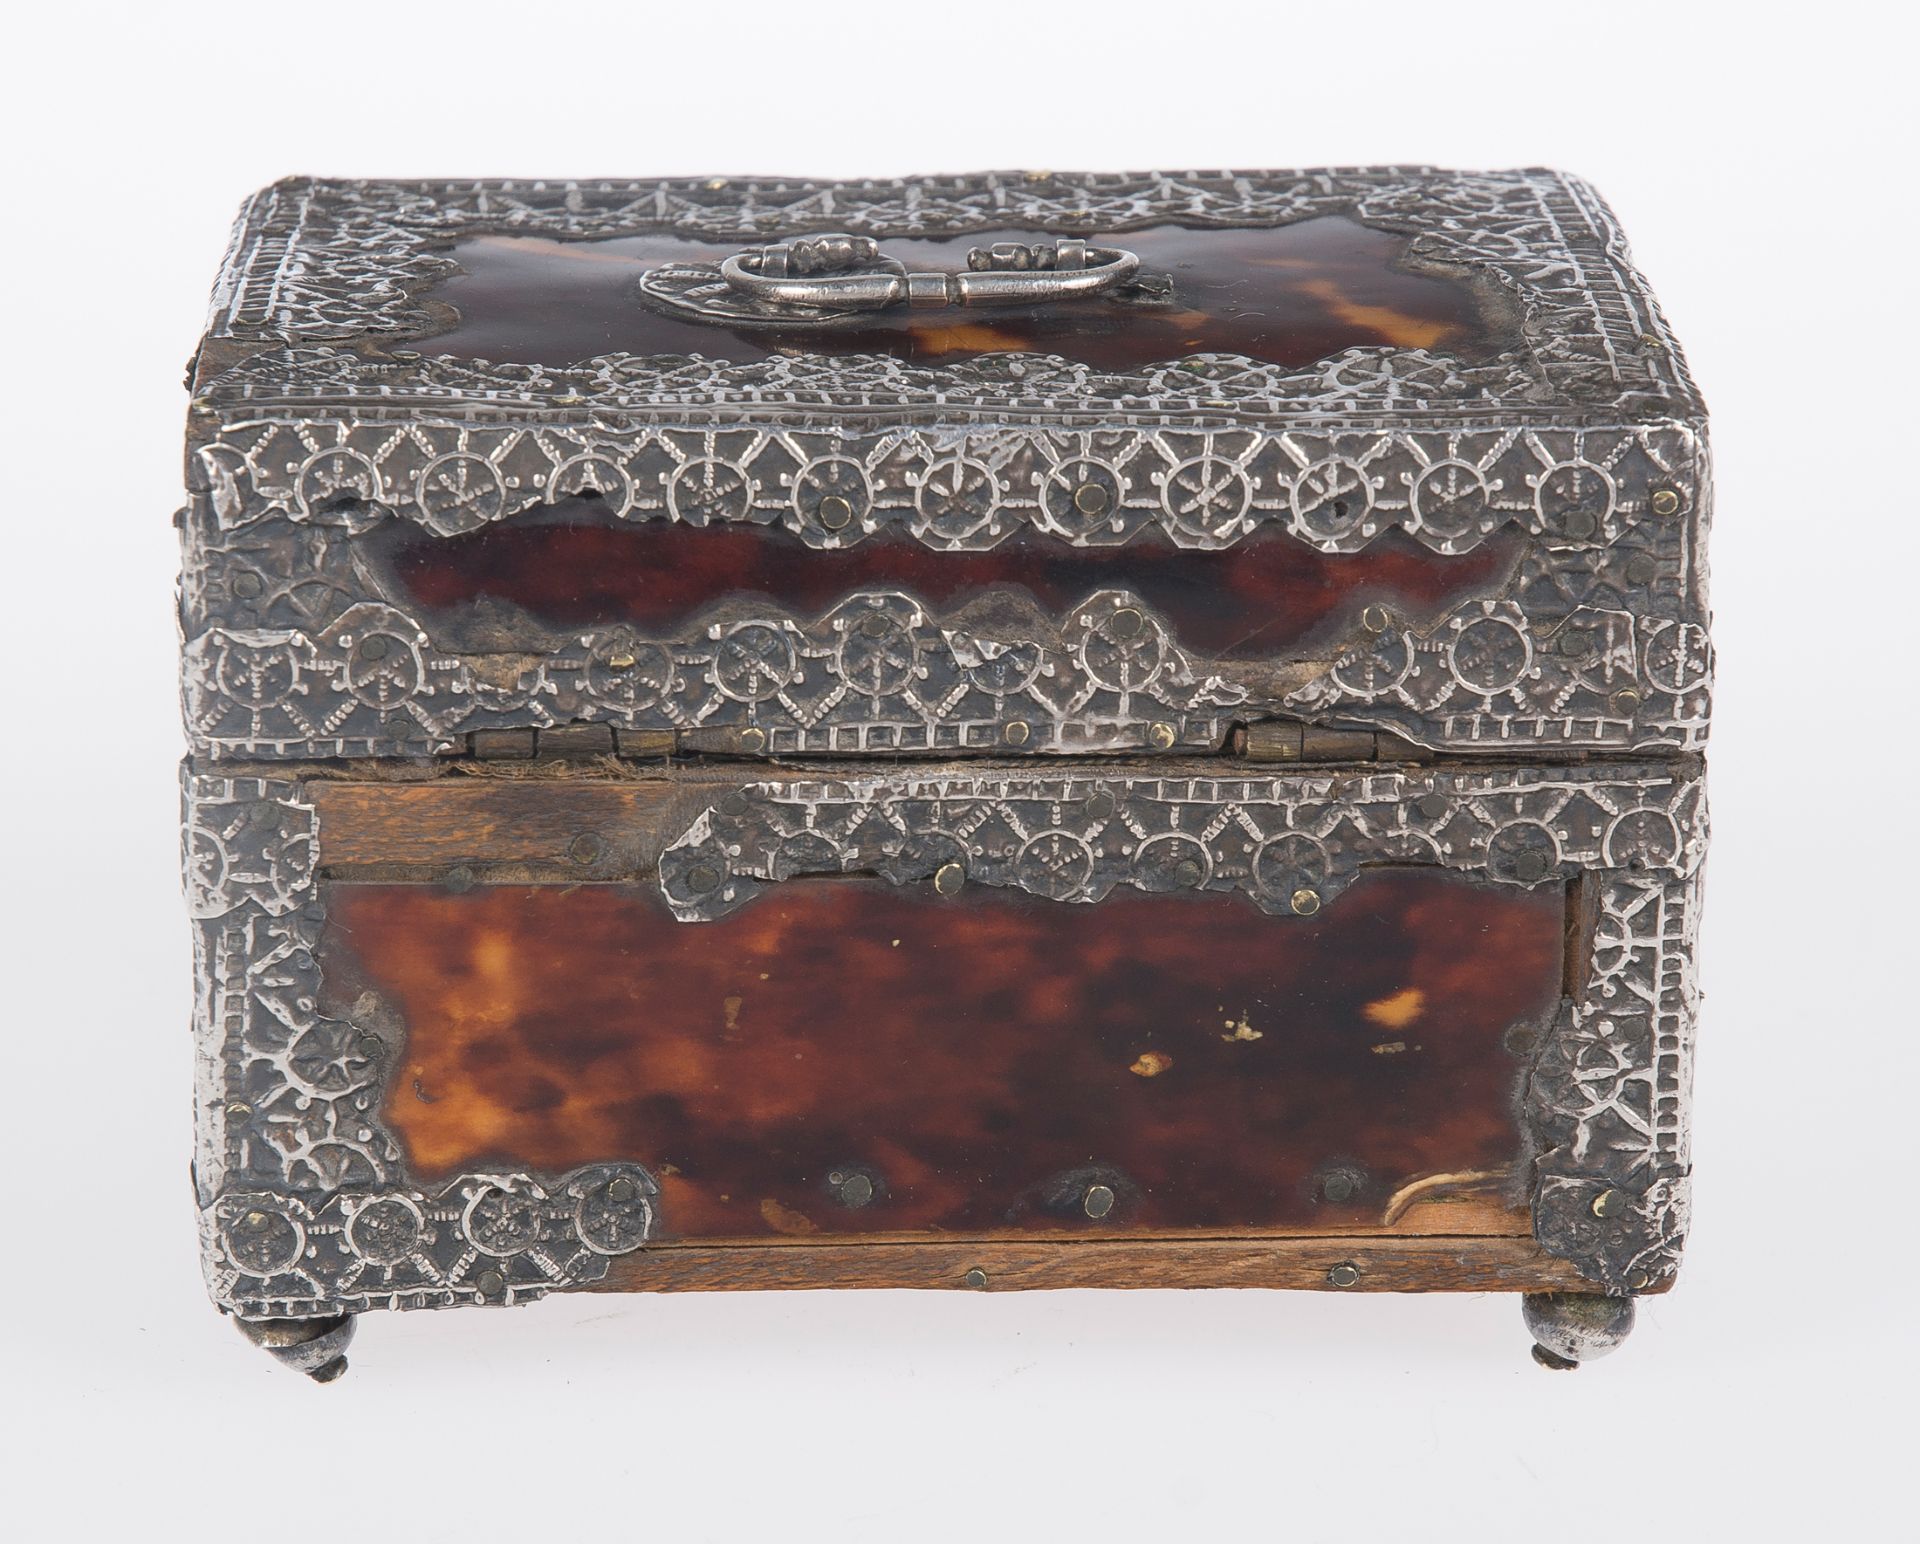 Small wooden chest covered in tortoiseshell and silver. Dutch colonies. Indonesia. 17th century. - Image 4 of 6